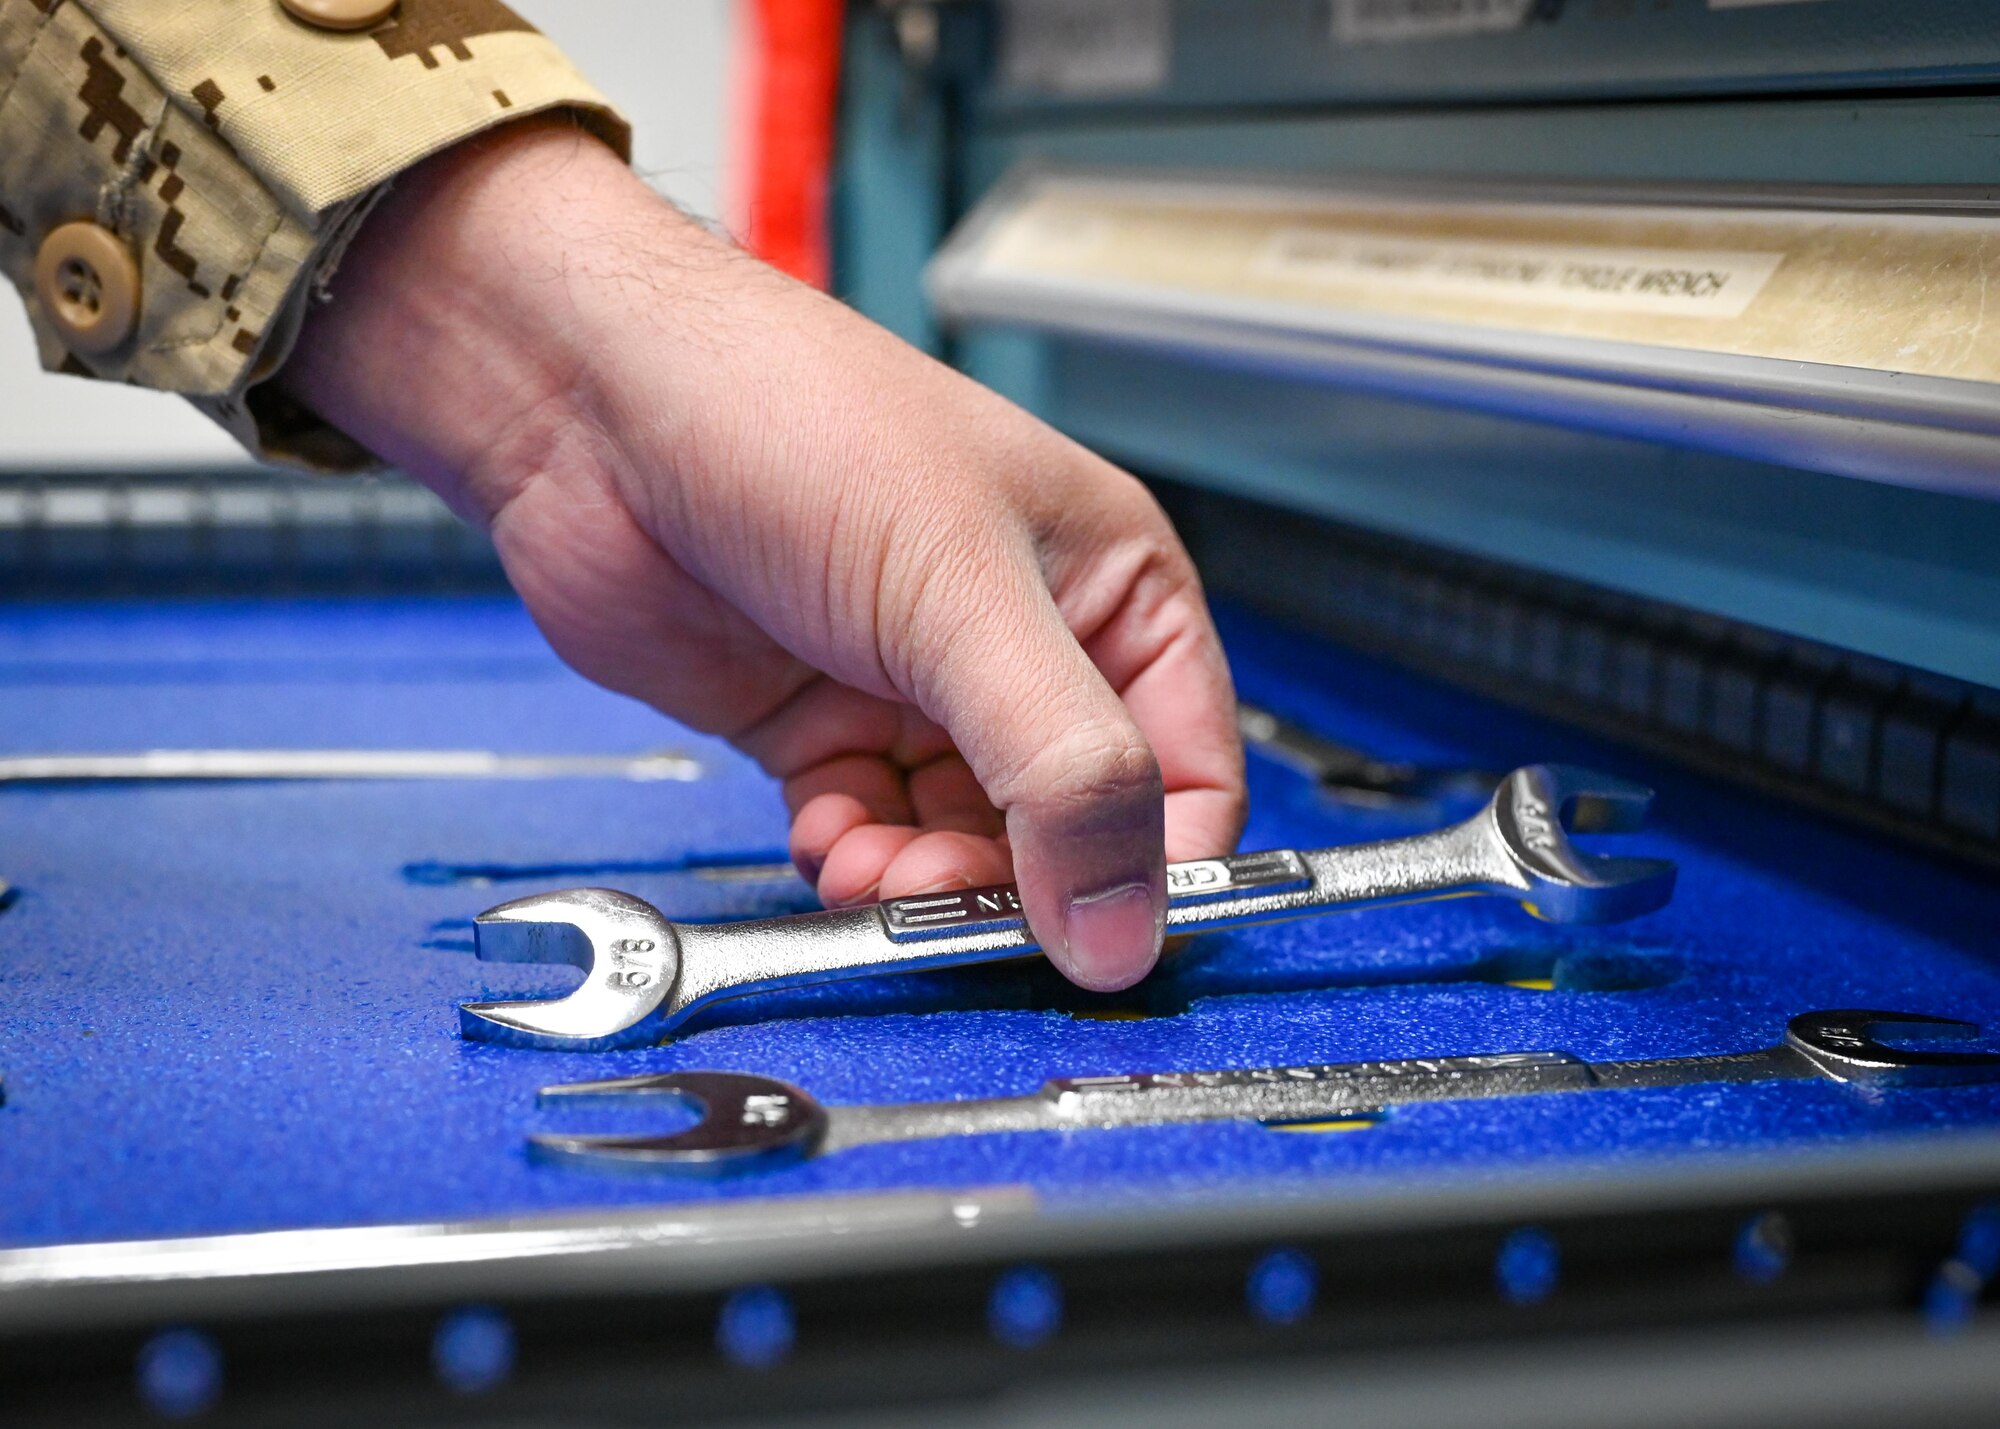 A close-up of a hand picking up a wrench from a tool box.